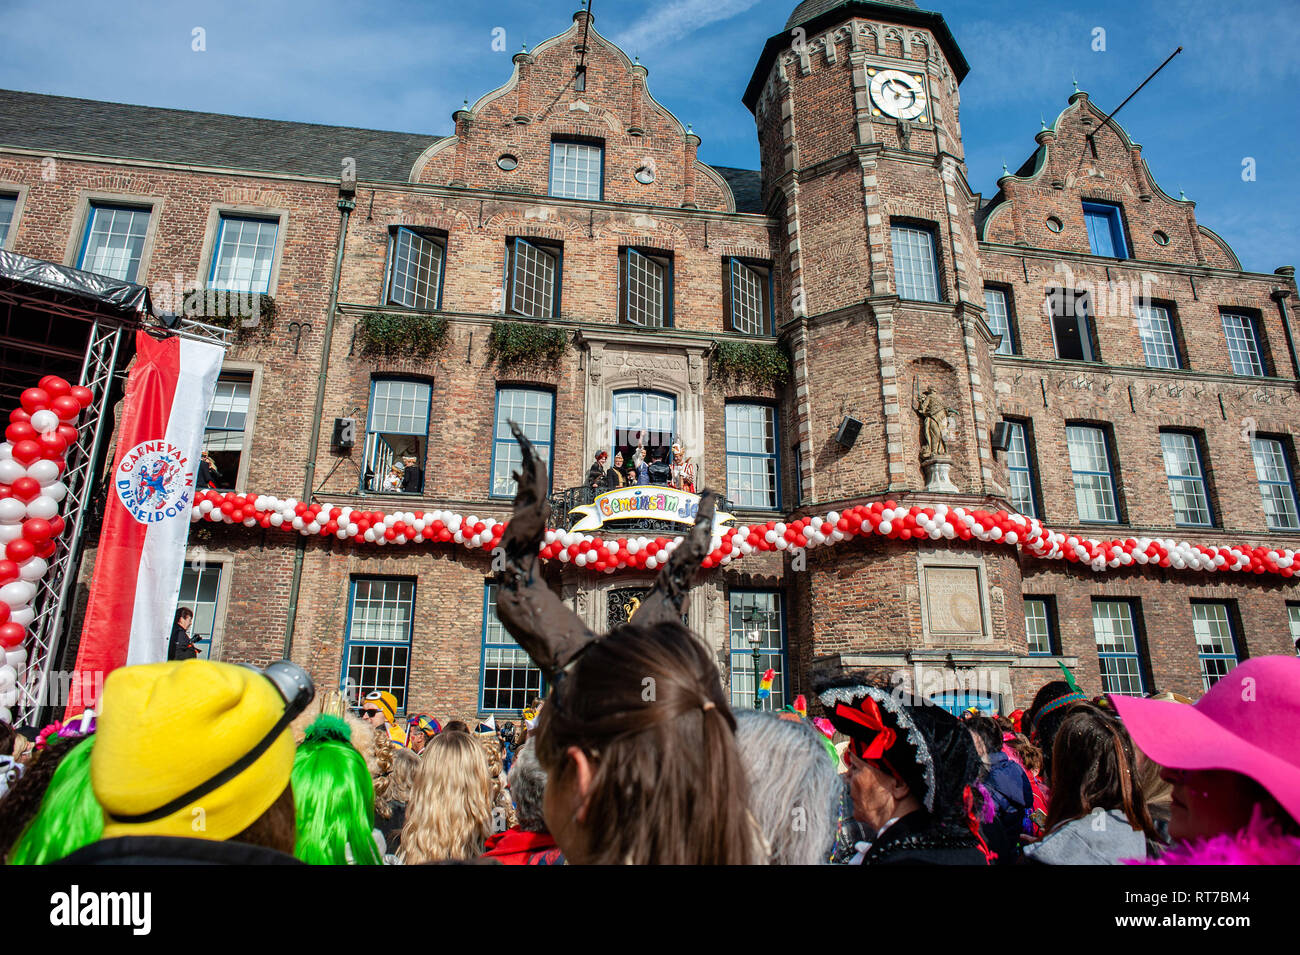 Dusseldorf, Rhine, Germany. 28th Feb, 2019. Princess of the Carnival is seen cutting the tie of the Mayor of Dusseldorf. On the first day of the carnival or Altweiberfastnacht, the women (called MÃ¶hnen) storm the City Council Offices to capture the Lord Mayor and take over the administration of the City for the night and that is the official opening of the street carnival in the old city of DÃ¼sseldorf. In Rhineland on this day, the ladies cut the ties of the men, it does not matter if they are in a position of importance or his age. Credit: ZUMA Press, Inc./Alamy Live News Stock Photo